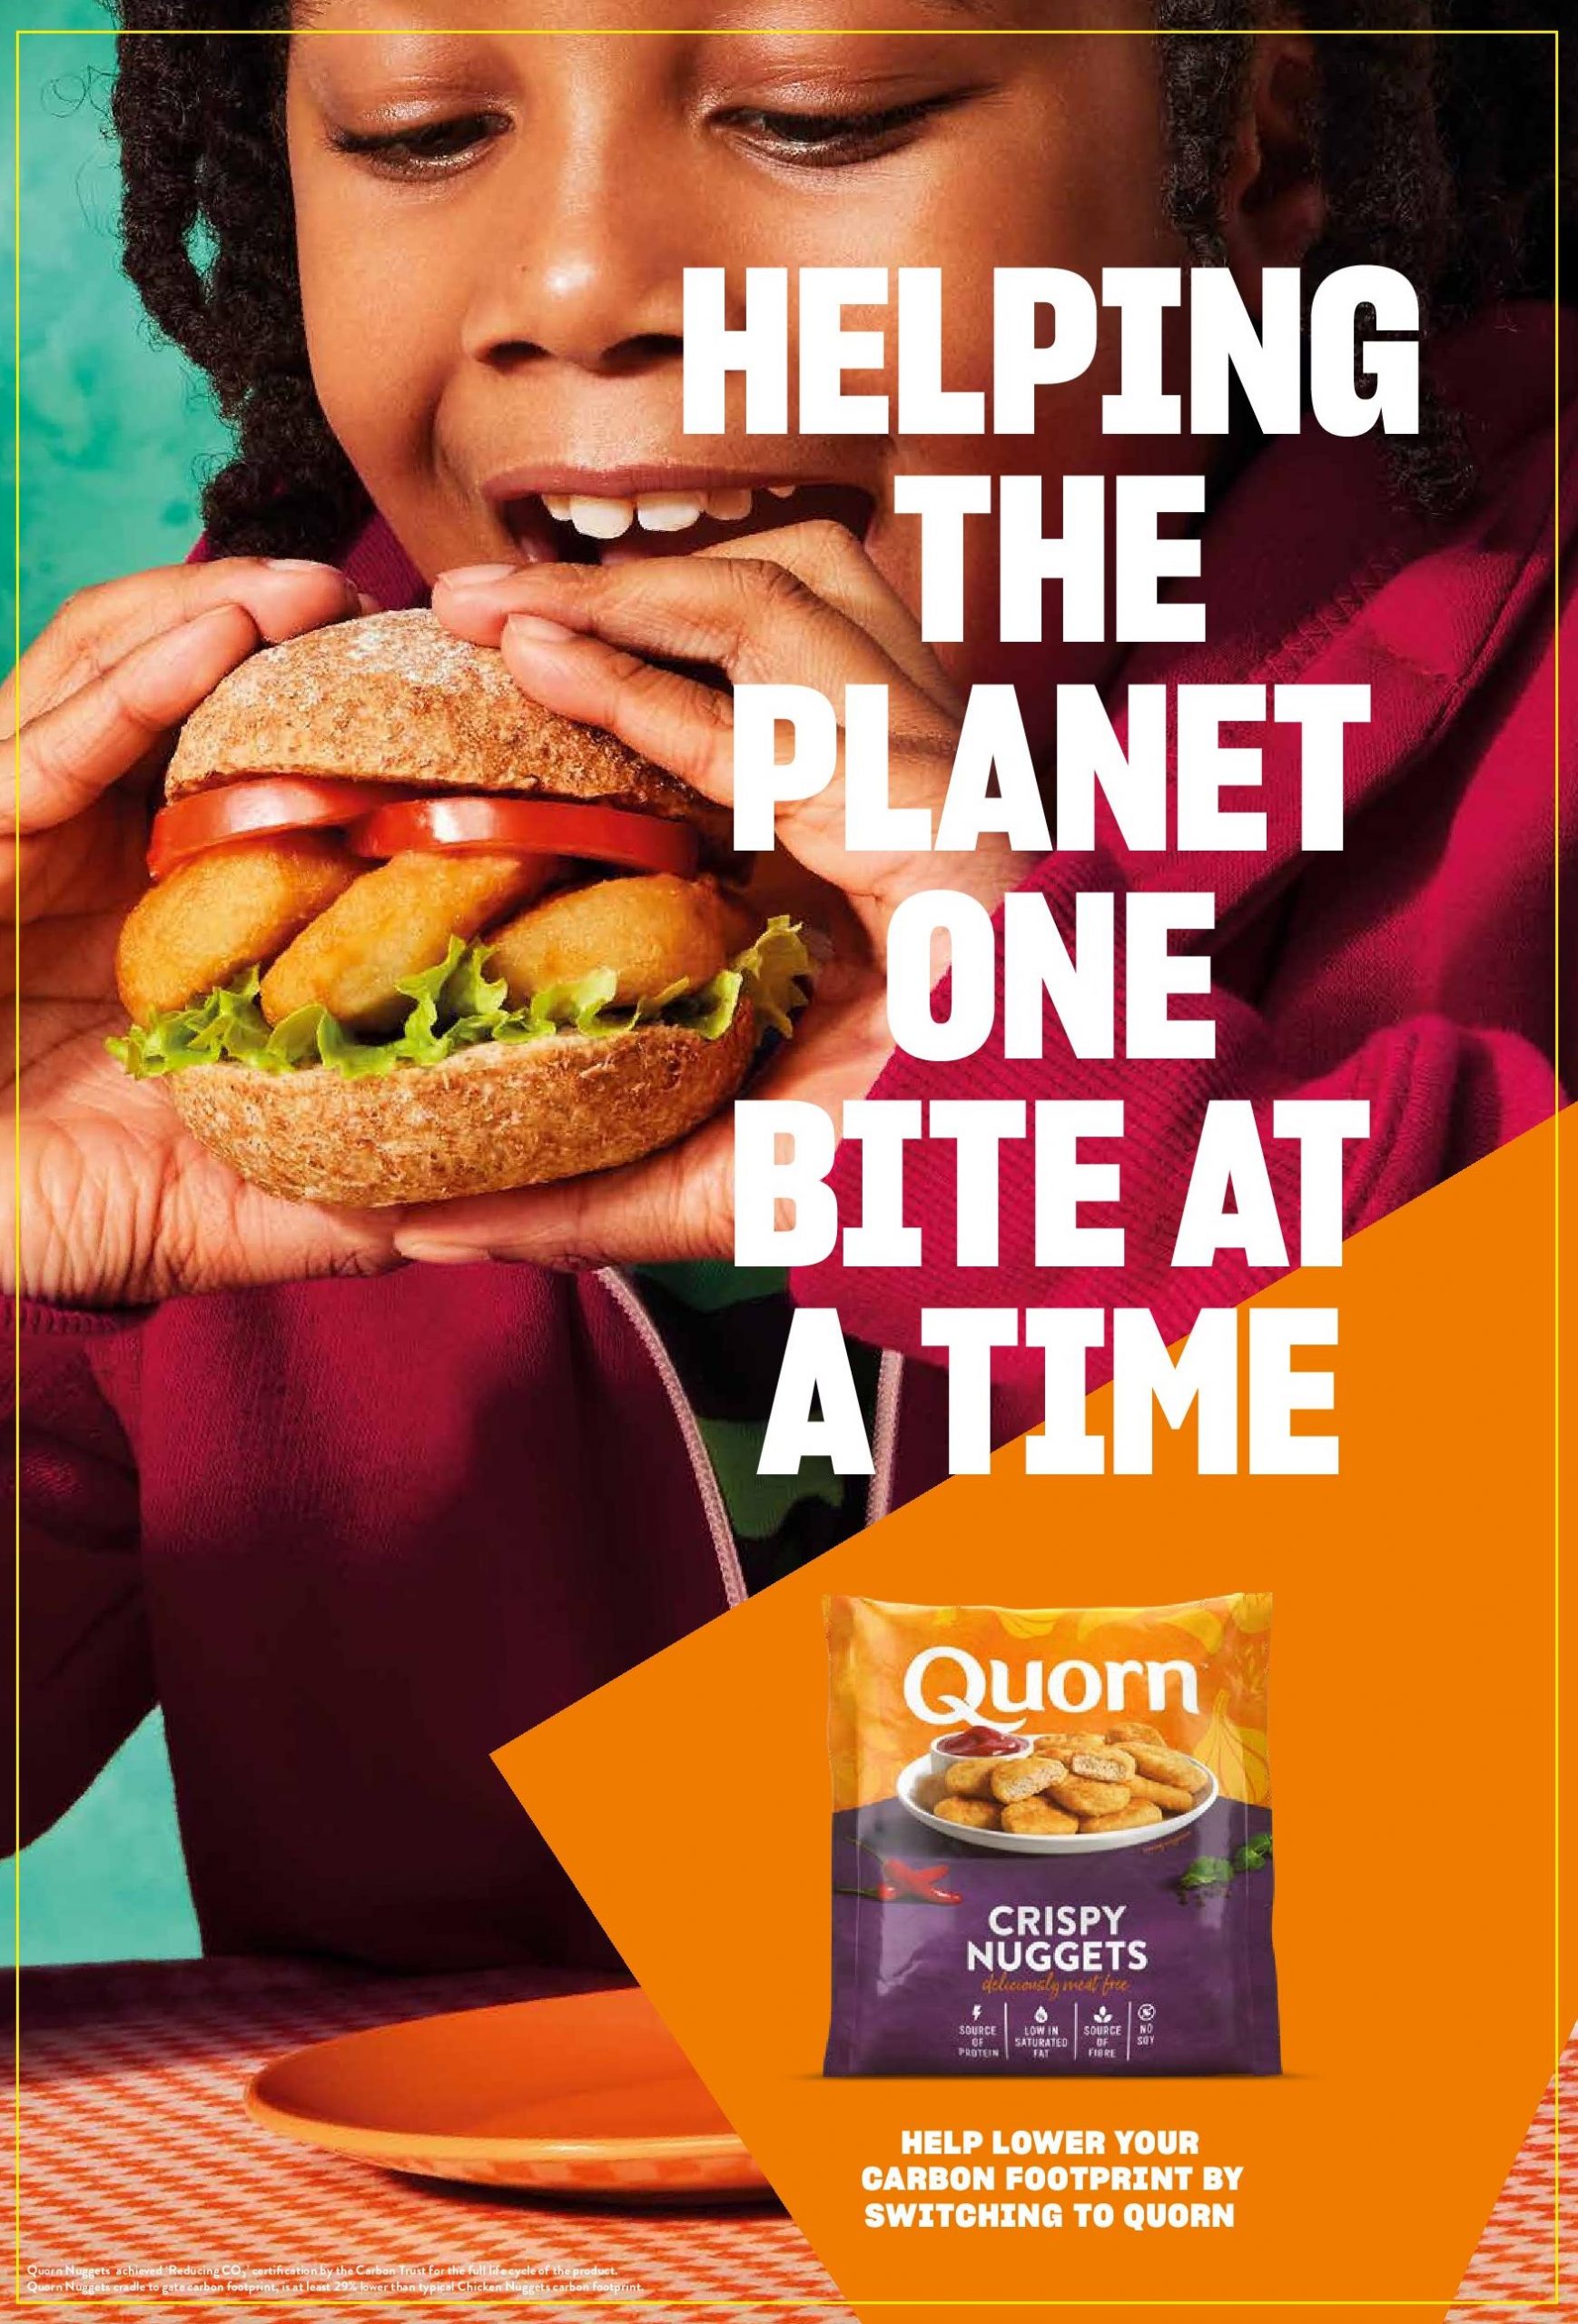 Quorn dials up nuggets for back-to-school campaign